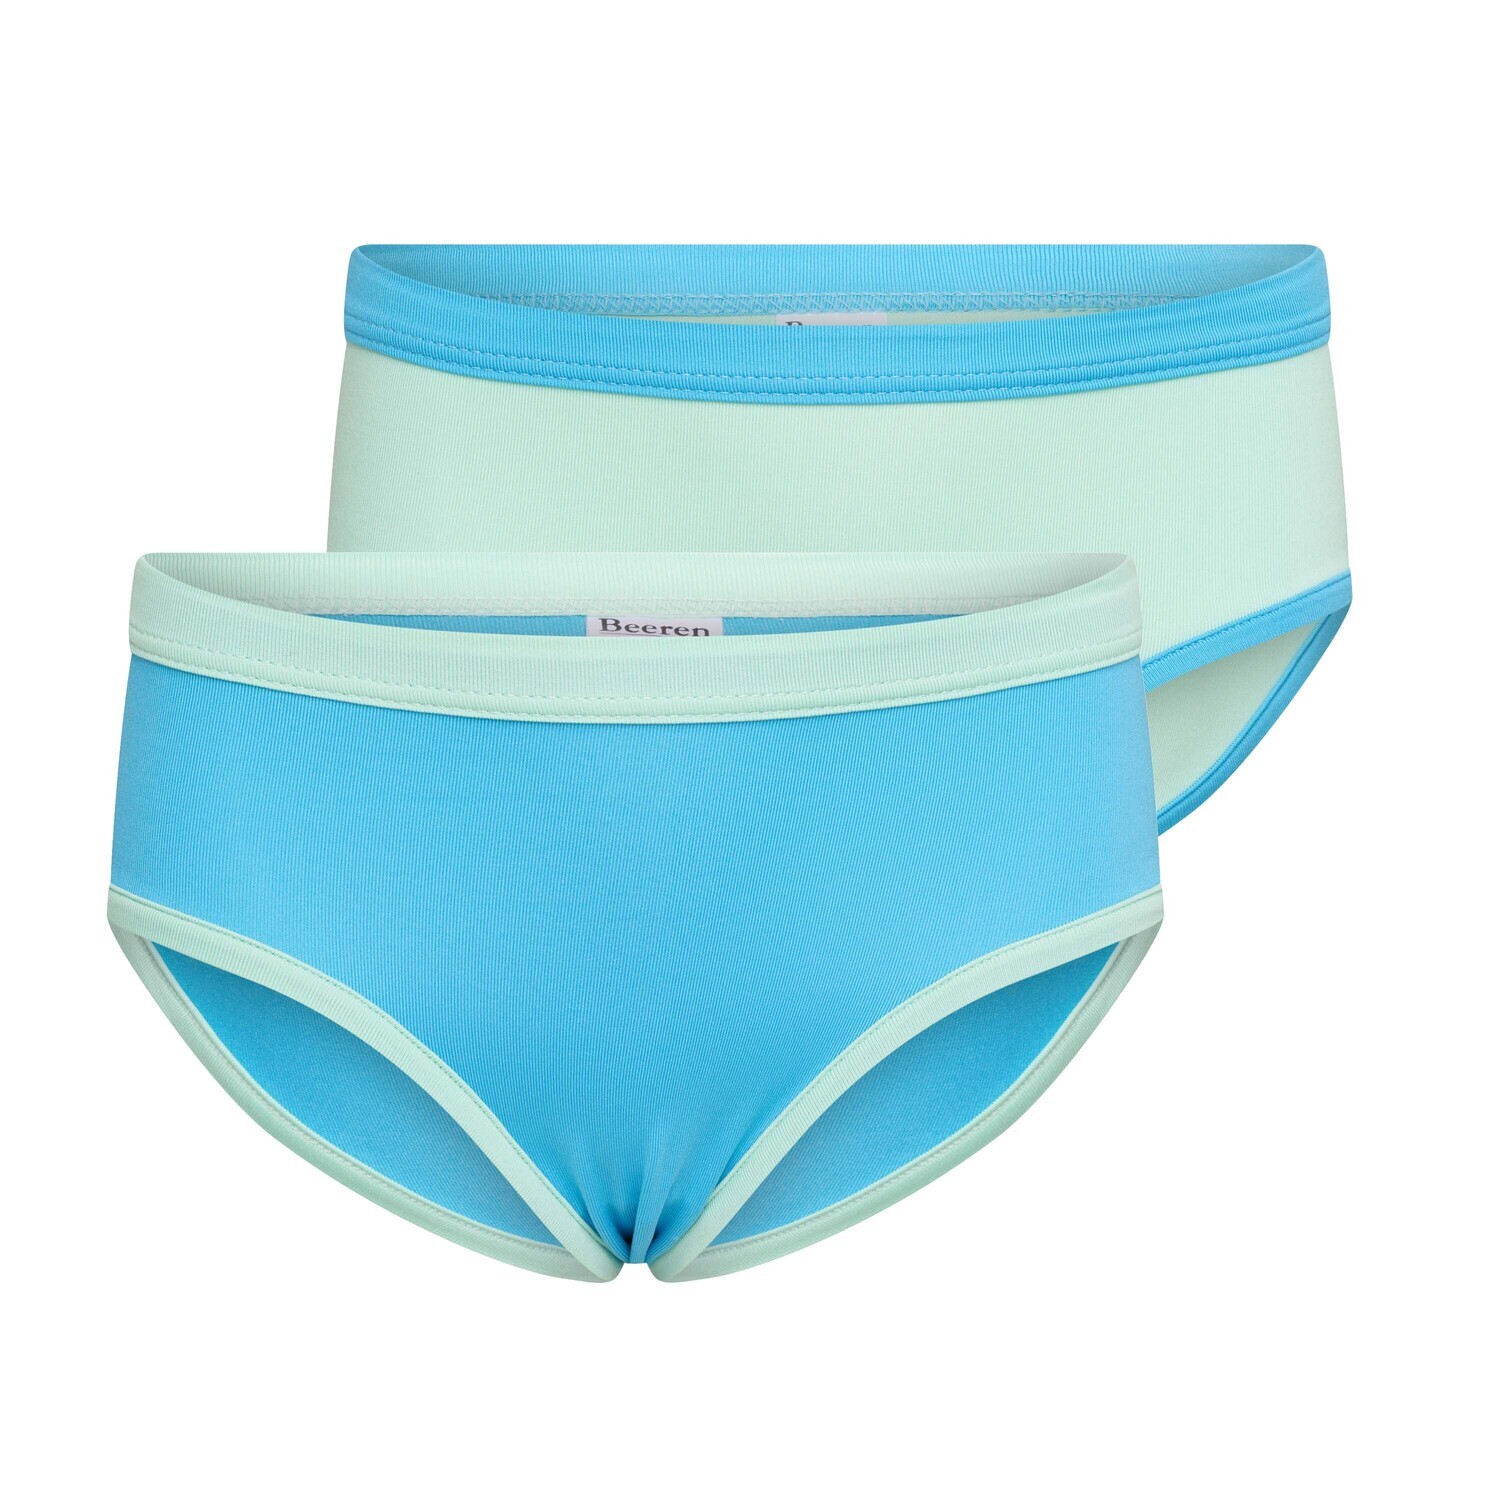 (03-233) Meisjes slip Mix and Match 2-Pack turquoise/mint 110/116